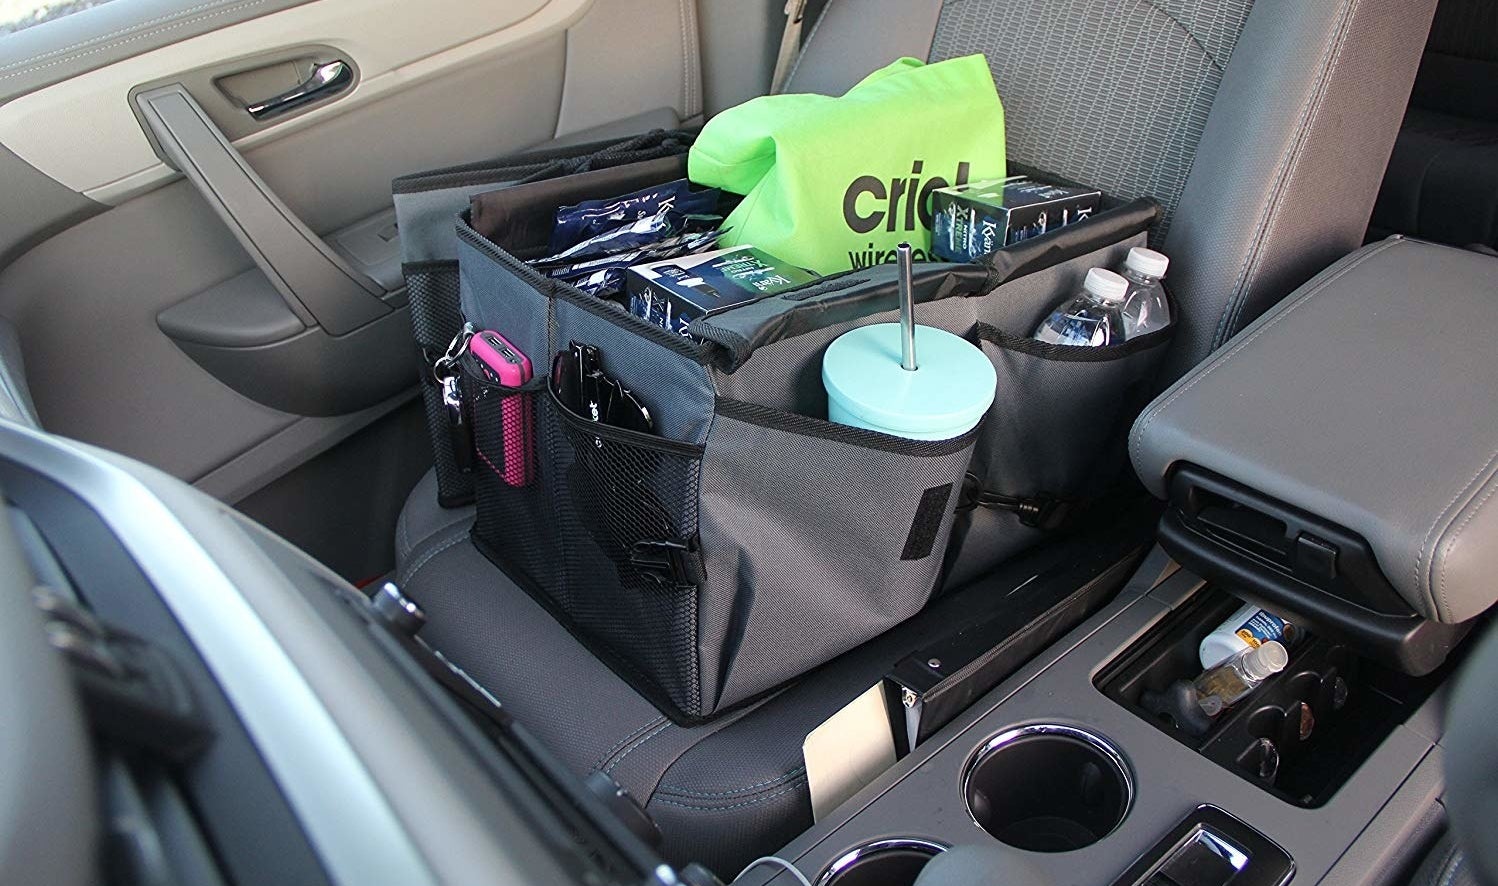 passenger seat of a car with the organizer filled with miscellaneous items on the seat